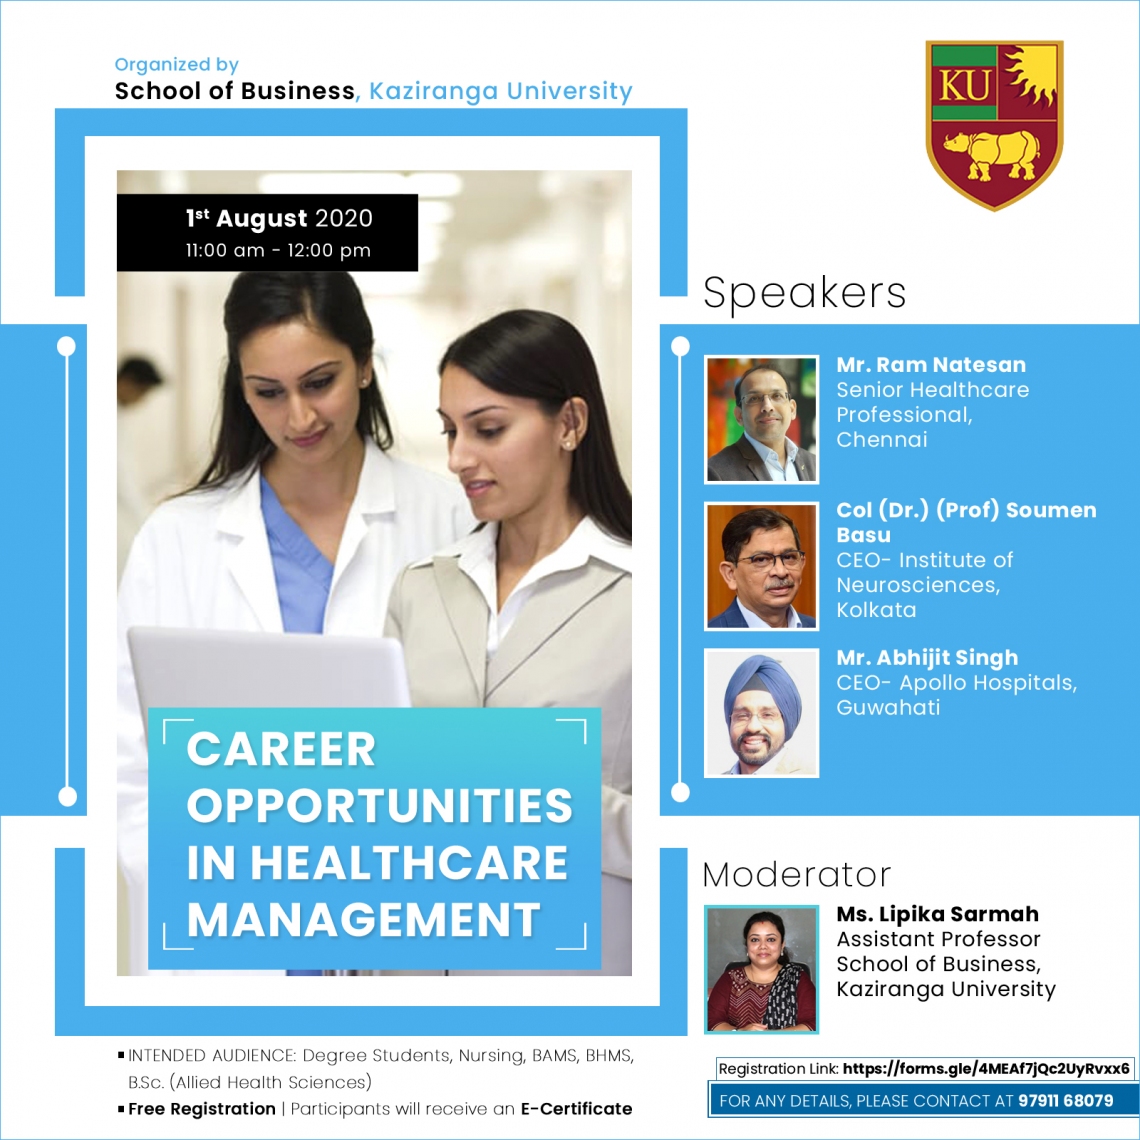 Webinar on the topic, "Career Opportunities in Healthcare Management"